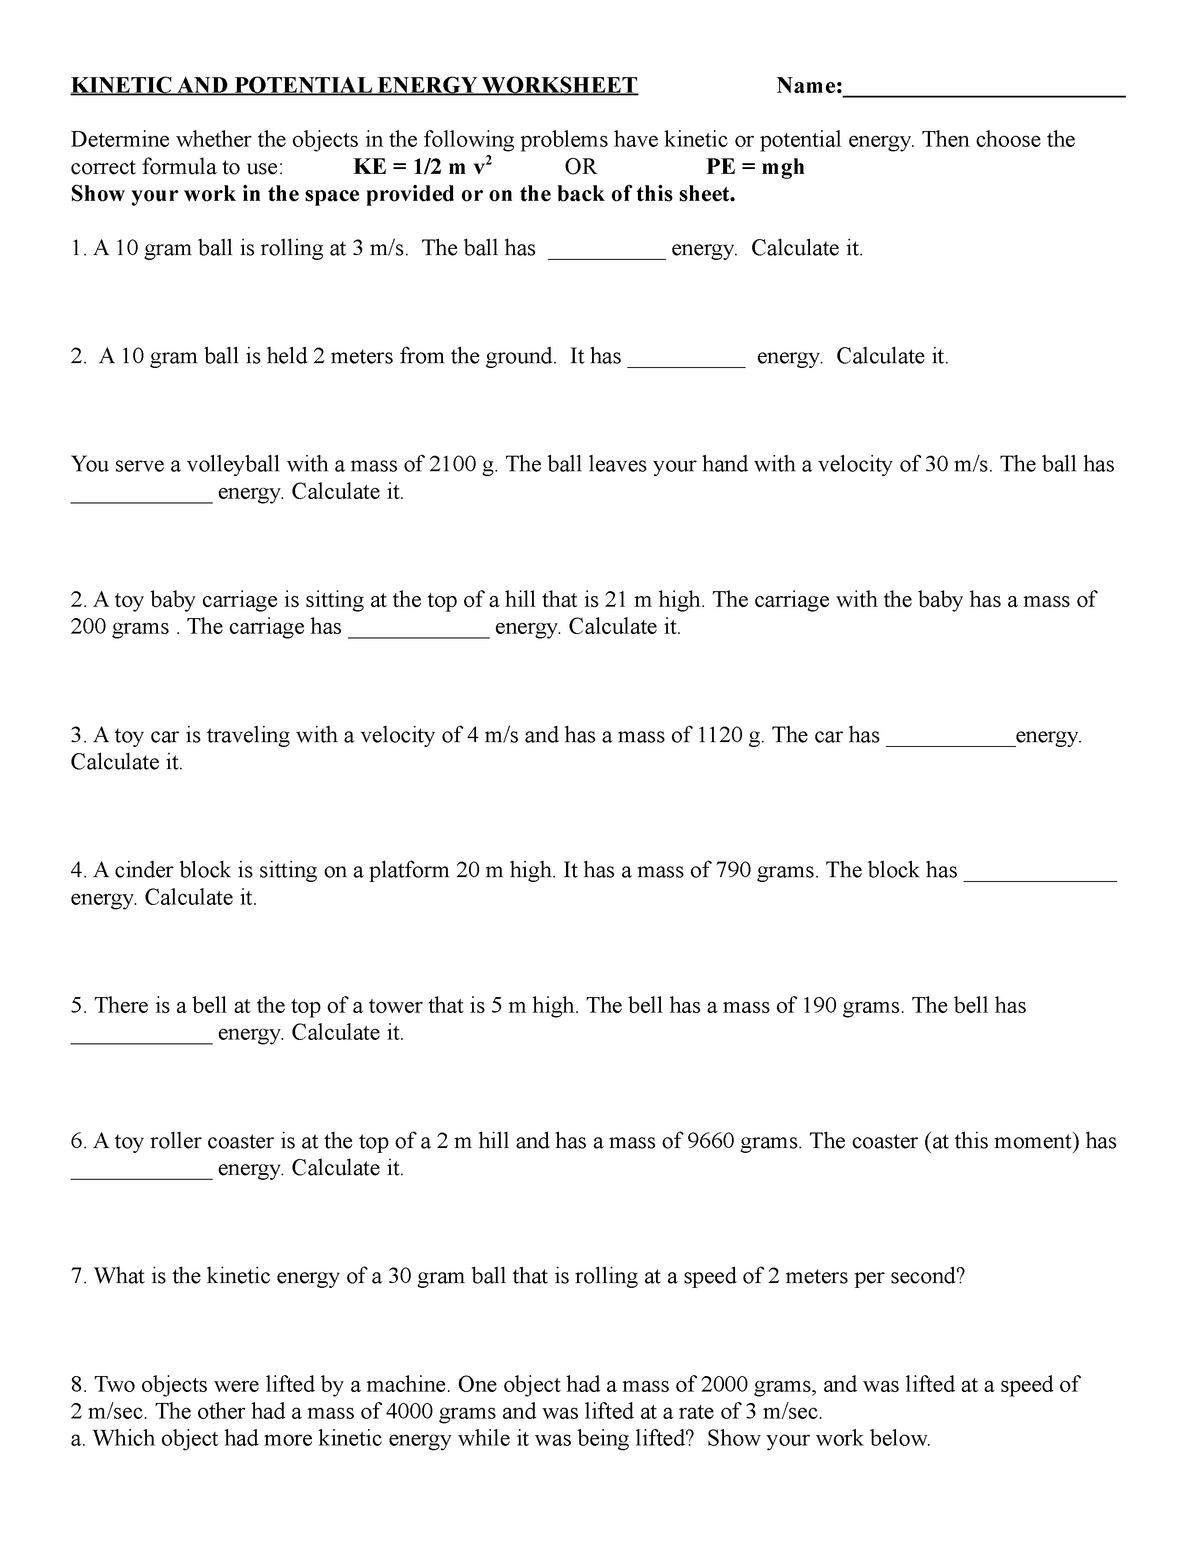 Calculating kinetic and potential energy - KINETIC AND POTENTIAL Pertaining To Work And Energy Worksheet